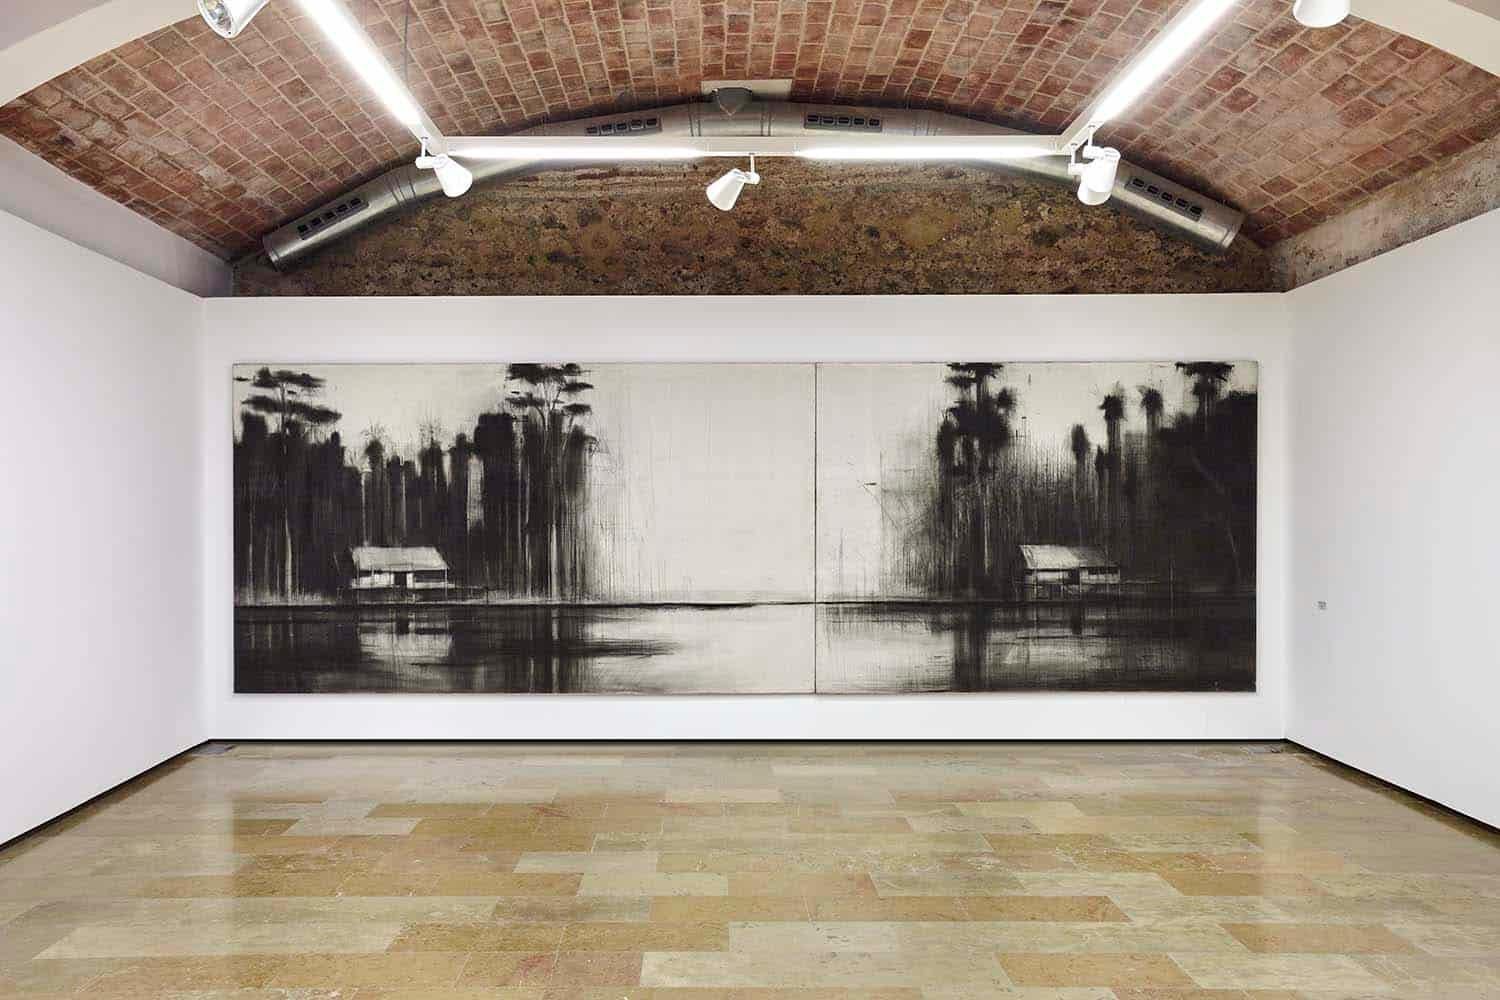 Pencil and charcoal on canvas, diptych made of two panels 212 cm x 282 cm (right) and 212 cm x  374 cm (left).
Selvas Negras #1 is a large-scale drawing by Spanish contemporary artist Calo Carratalá, taken from the 